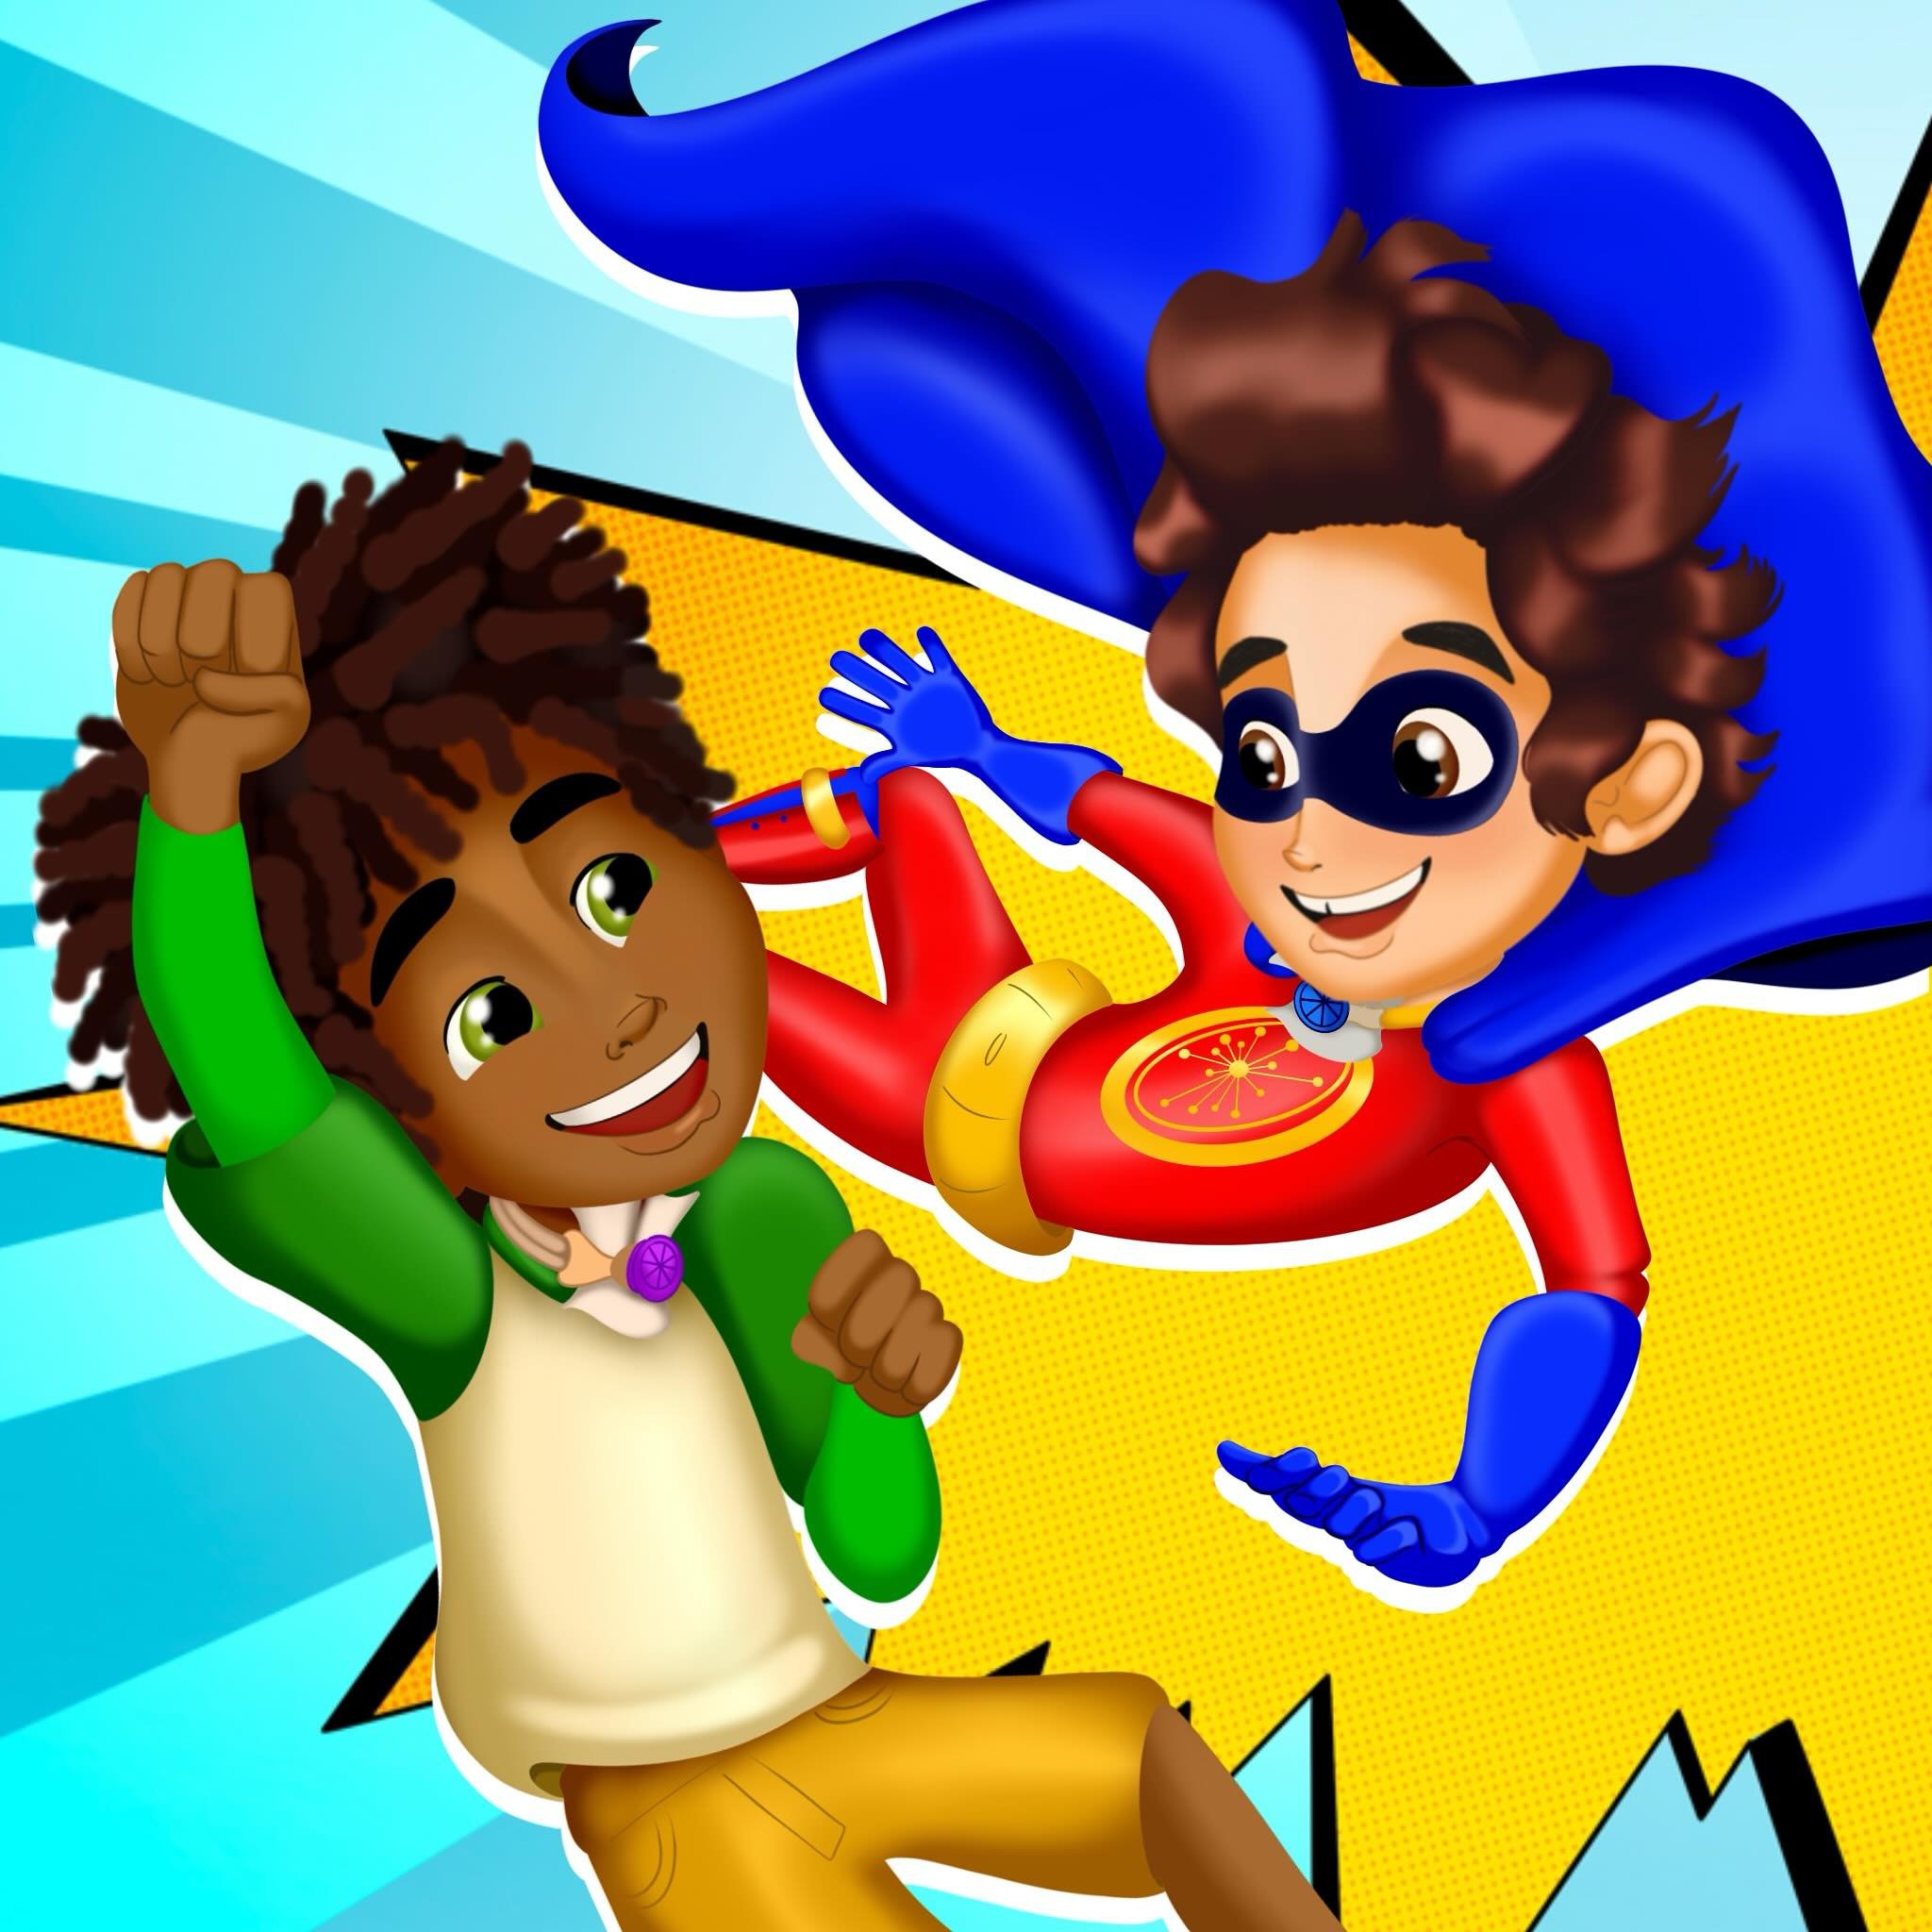 Make every day an adventure with SuperCaptainBraveMan! 🦸🏻📚💥

The Hero Inside and other award-winning titles are available now at SuperCaptainBraveMan.com!

#SuperCaptainBraveMan #books #childrensbooks #childrensbook #superhero #disability